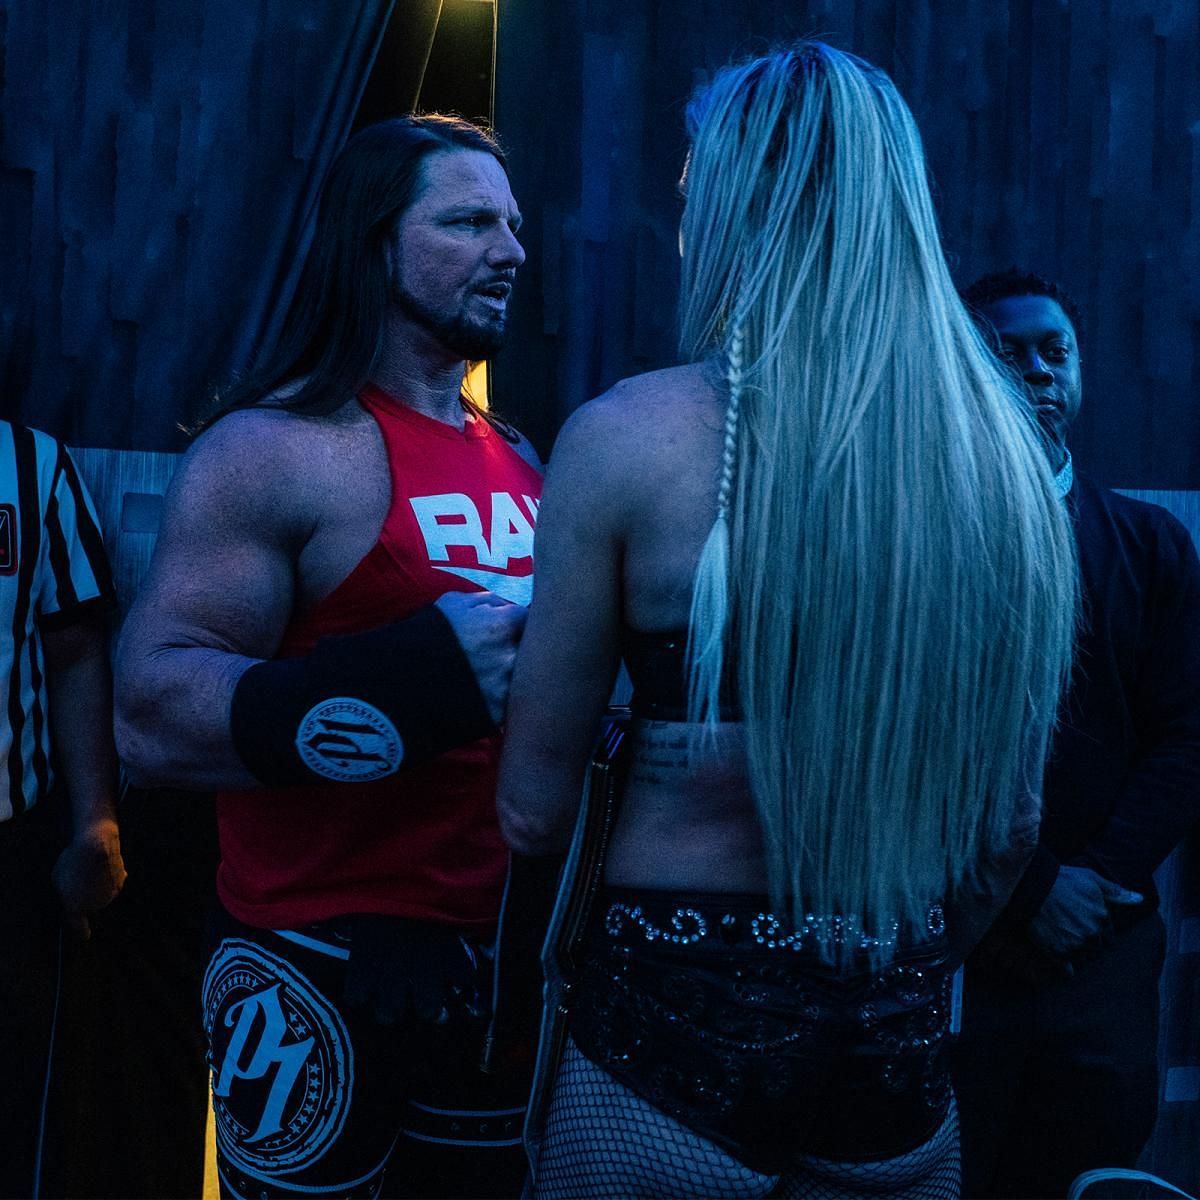 AJ Styles and Charlotte Flair